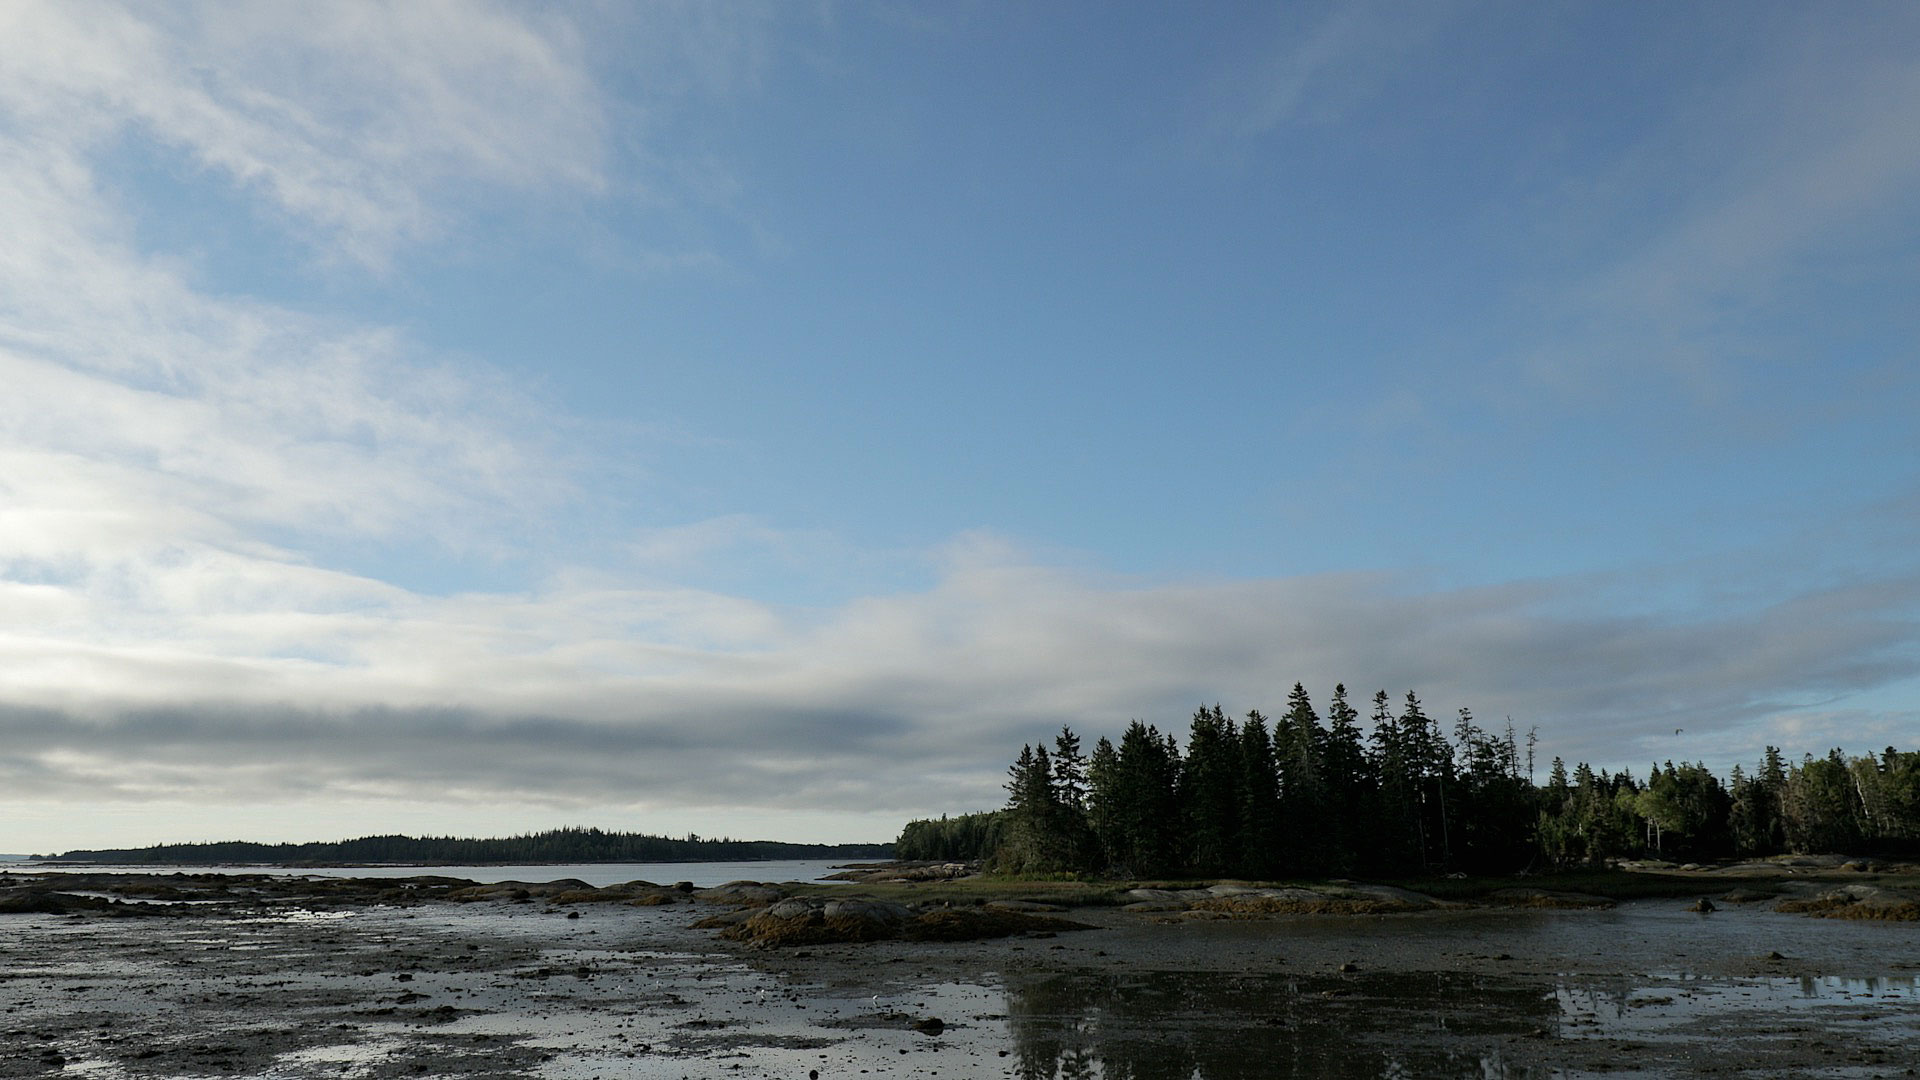 Clouds rolling in toward Apple Island. Canon 1DX Mark II and Canon 16-35 f/4L IS lens. Frame grab from 4K footage. Deer Isle, ME. September, 2016.